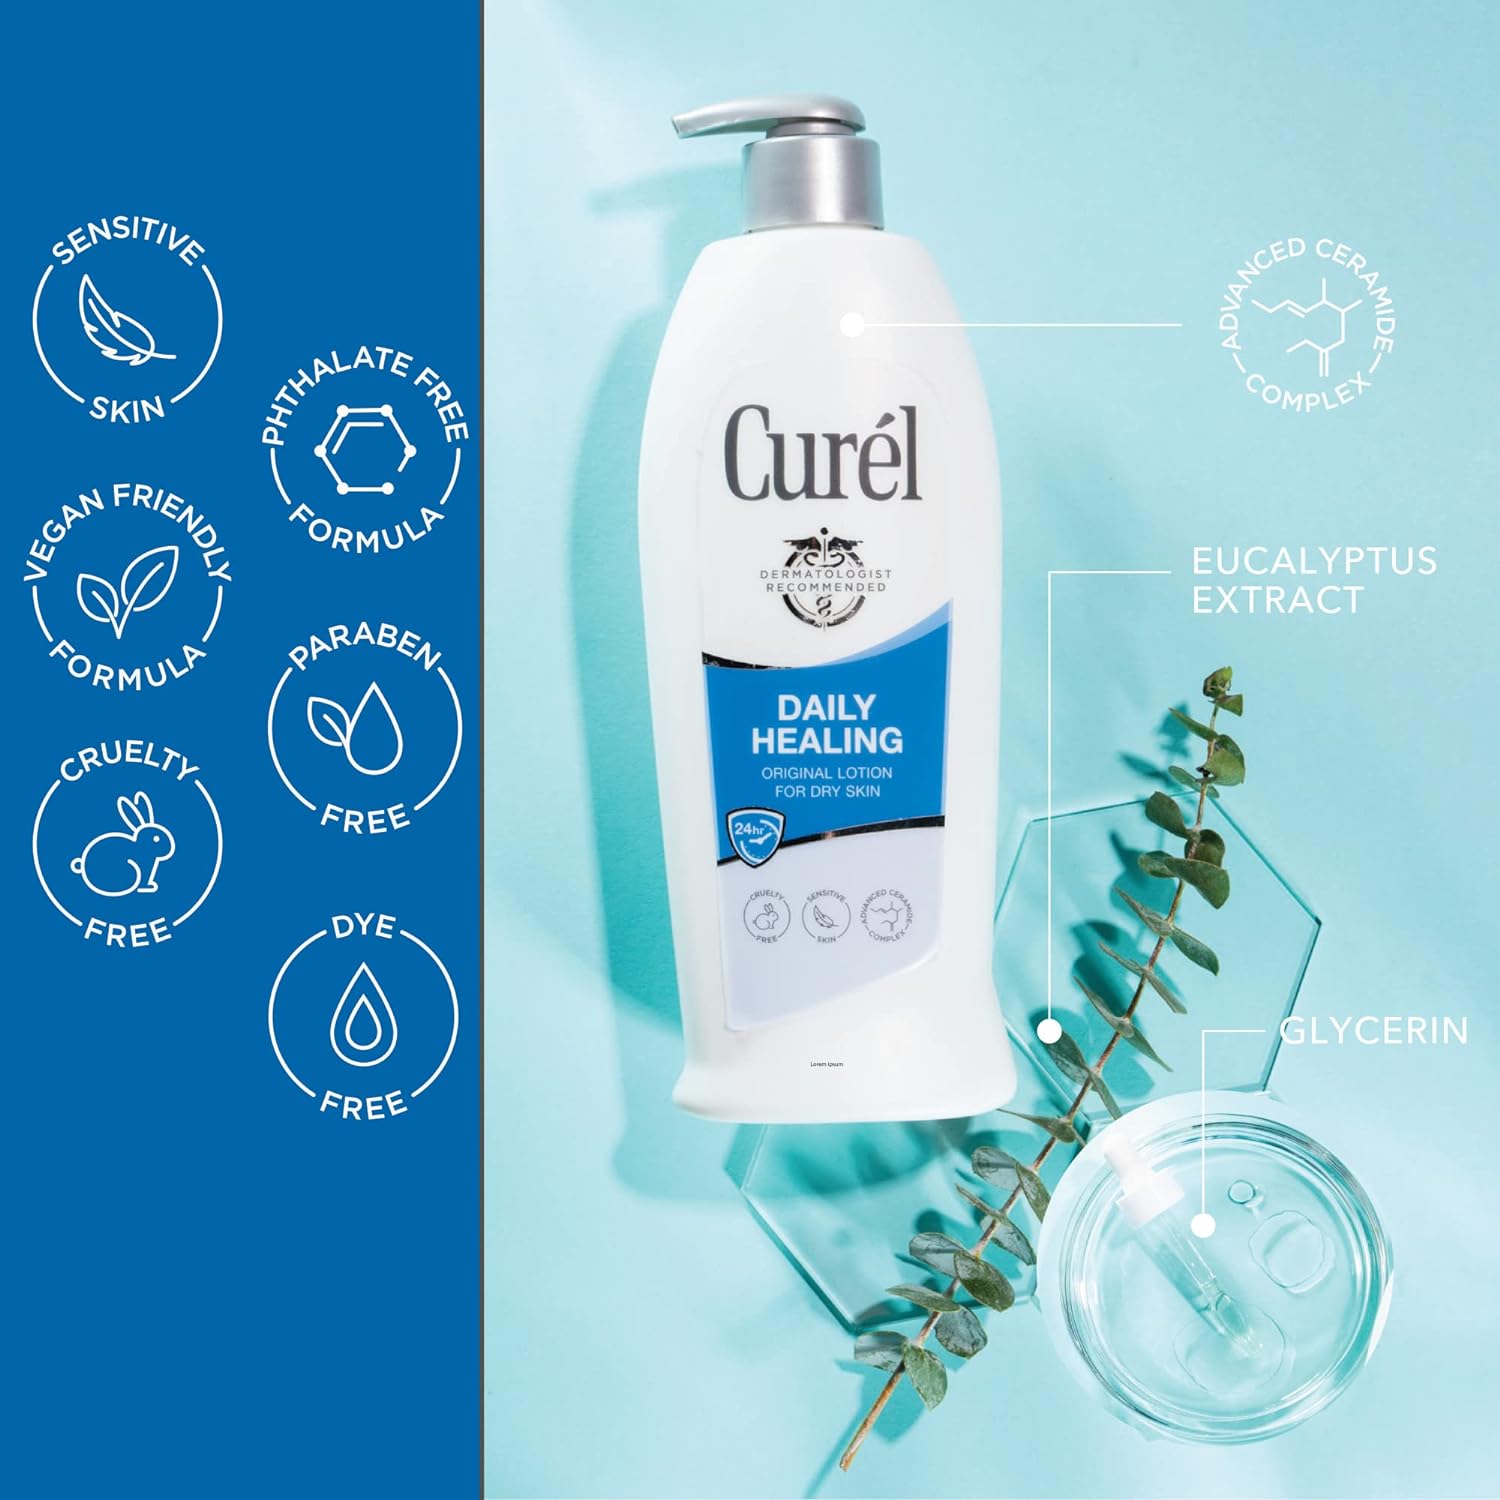 Curel Daily Healing Body Lotion for Dry Skin, Hand and Moisturizer Repairs Skin Retains Moisture, with Advanced Ceramides Complex, 20 Ounce : Beauty Products : Beauty & Personal Care